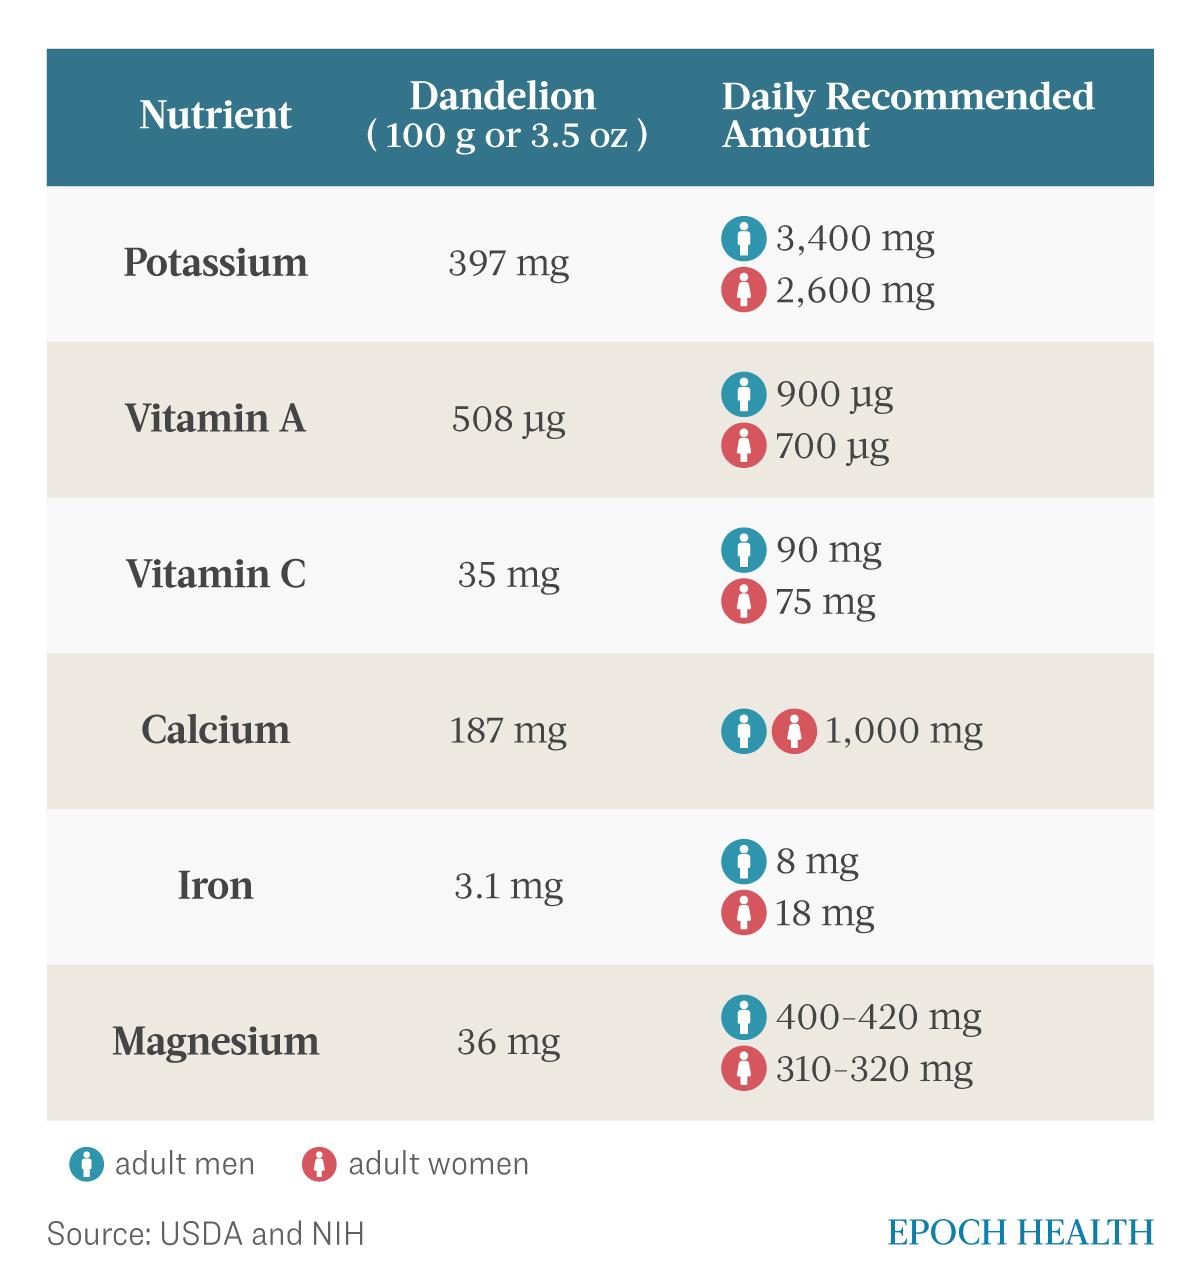 Daily nutrient recommendations. (The Epoch Times)